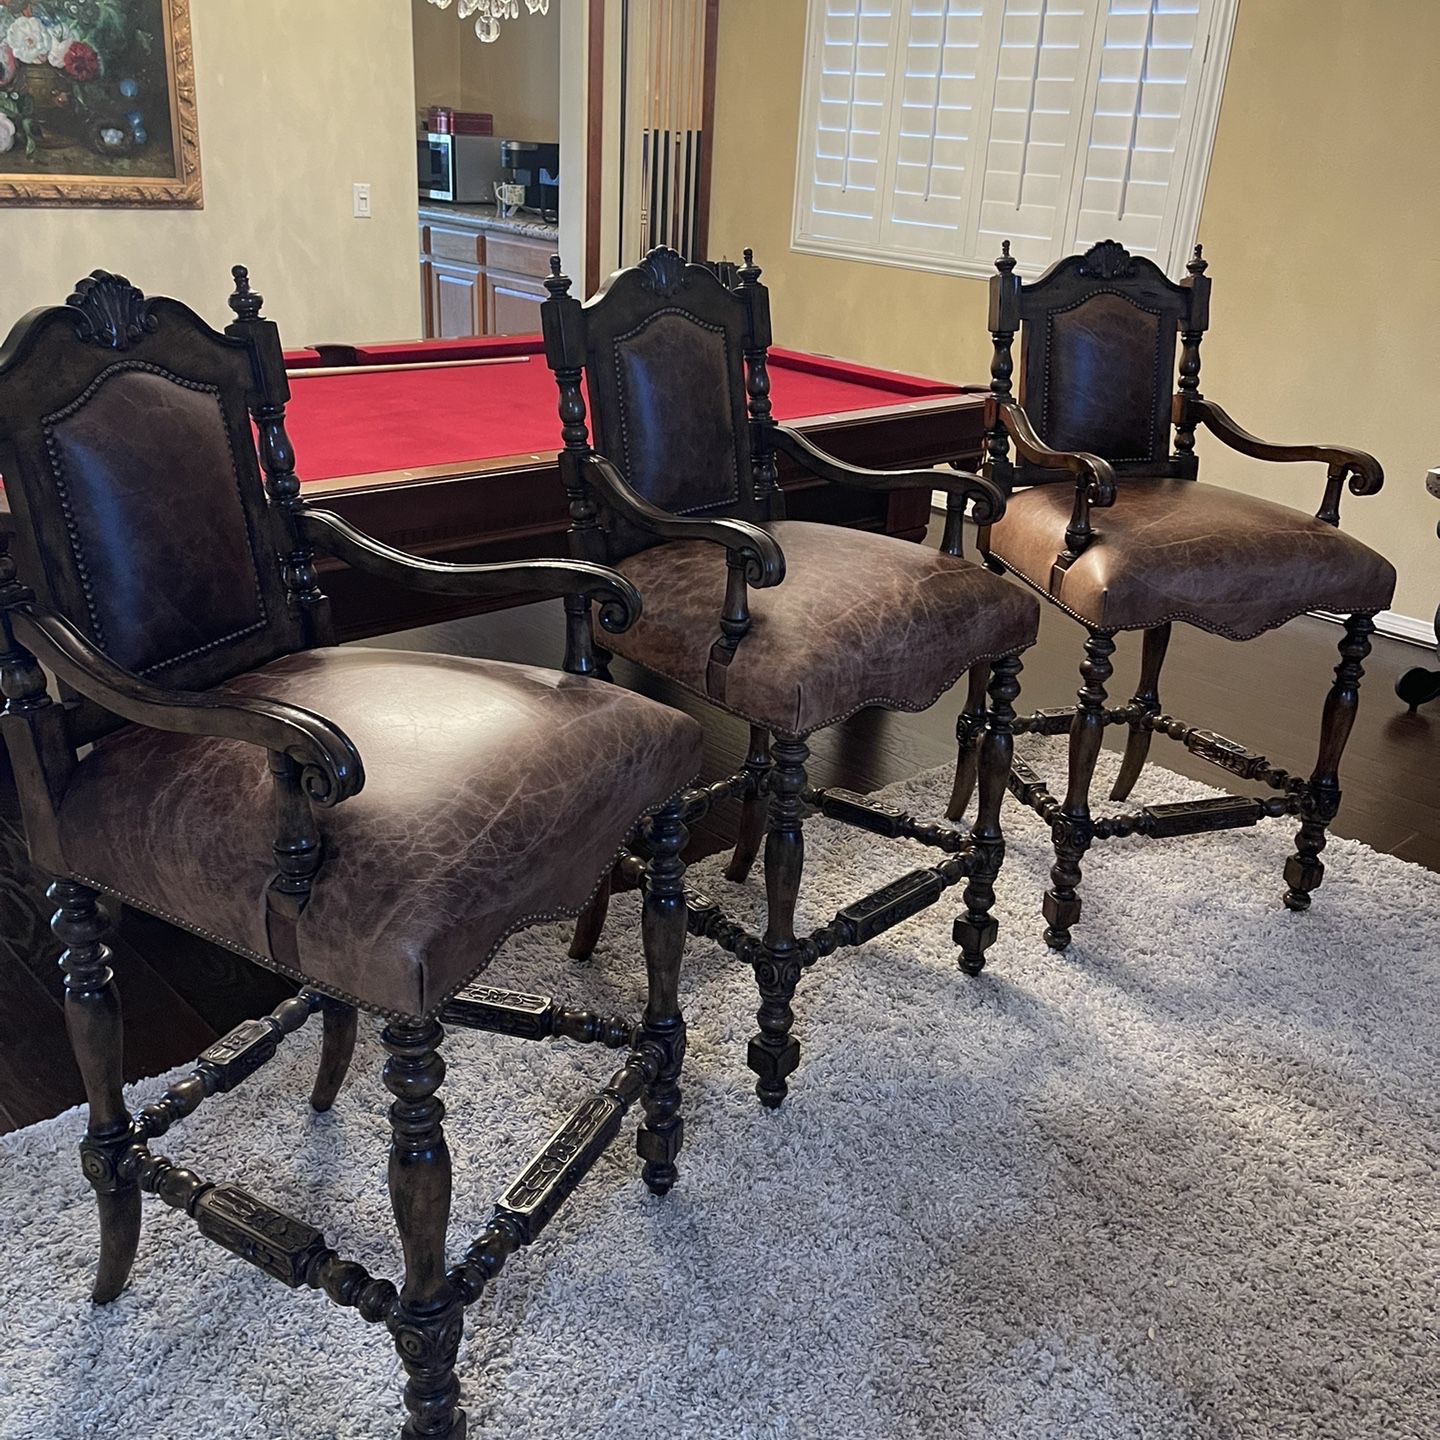 maitland-smith Bar Stools Chairs $275 Each Chair ($825 For All 3)